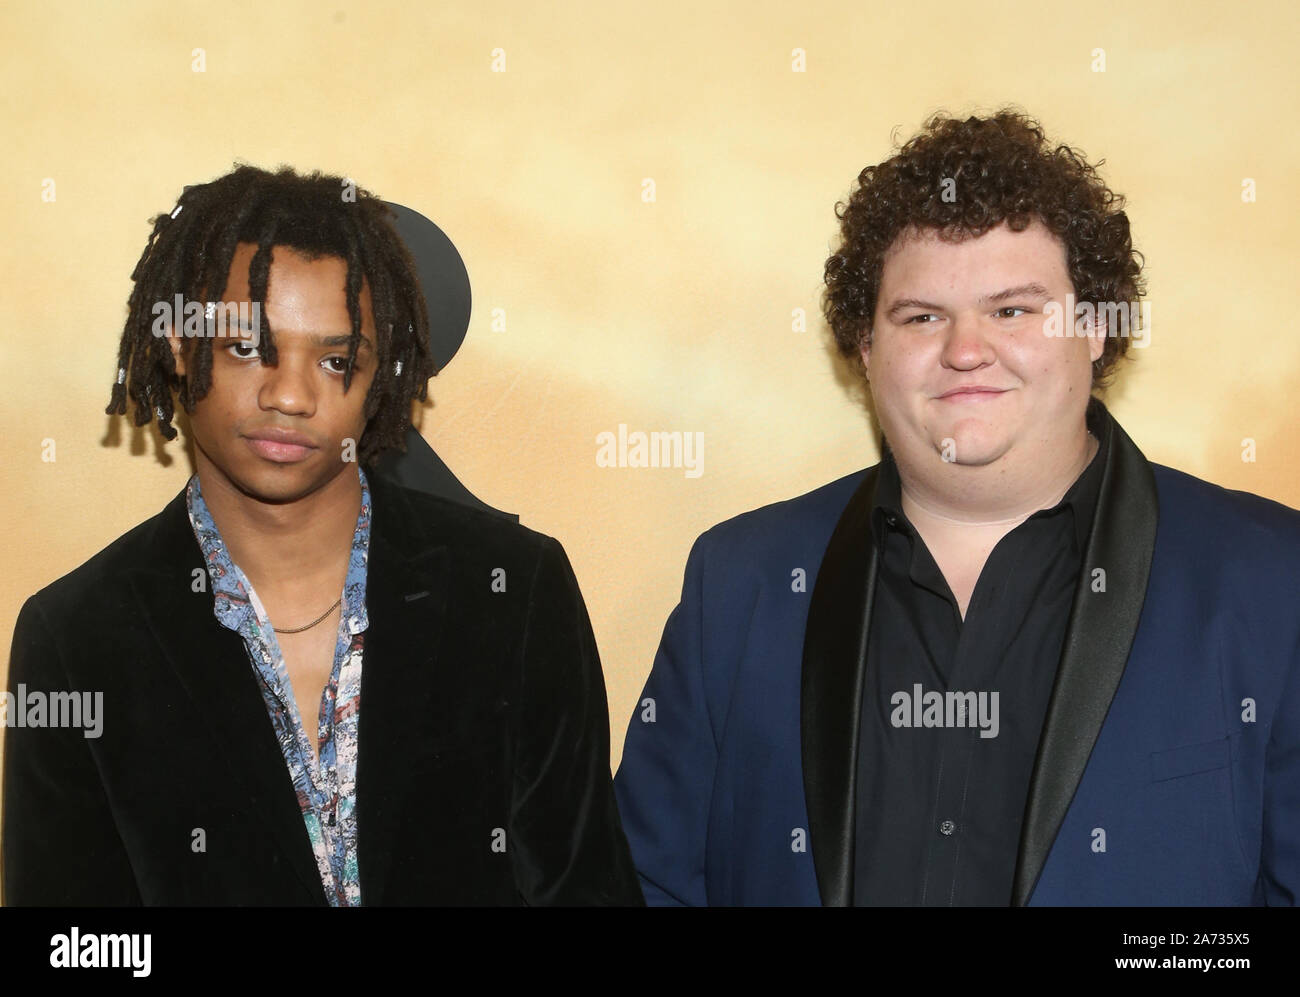 Los Angeles, Ca. 29th Oct, 2019. Henry Hunter Hall, Guest, at the Los Angeles Premiere of Harriet at The Orpheum in Los Angeles, California on October 29, 2019. Credit: Faye Sadou/Media Punch/Alamy Live News Stock Photo